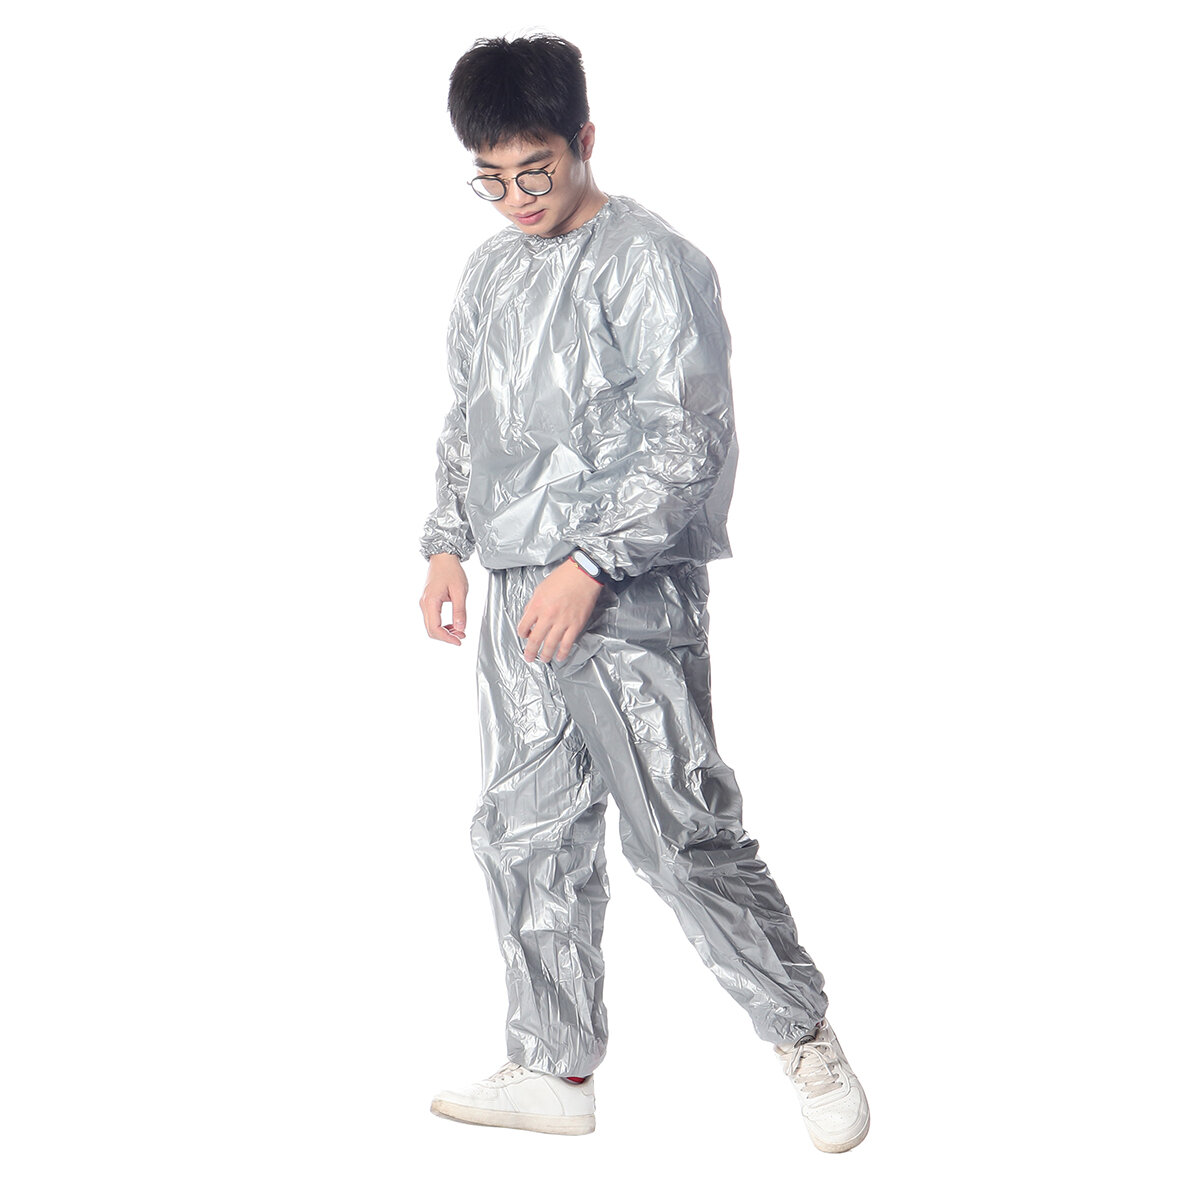 Silver Heavy Duty Sweat Sauna Suit Exercise Gym Fitness Weight Anti-Rips